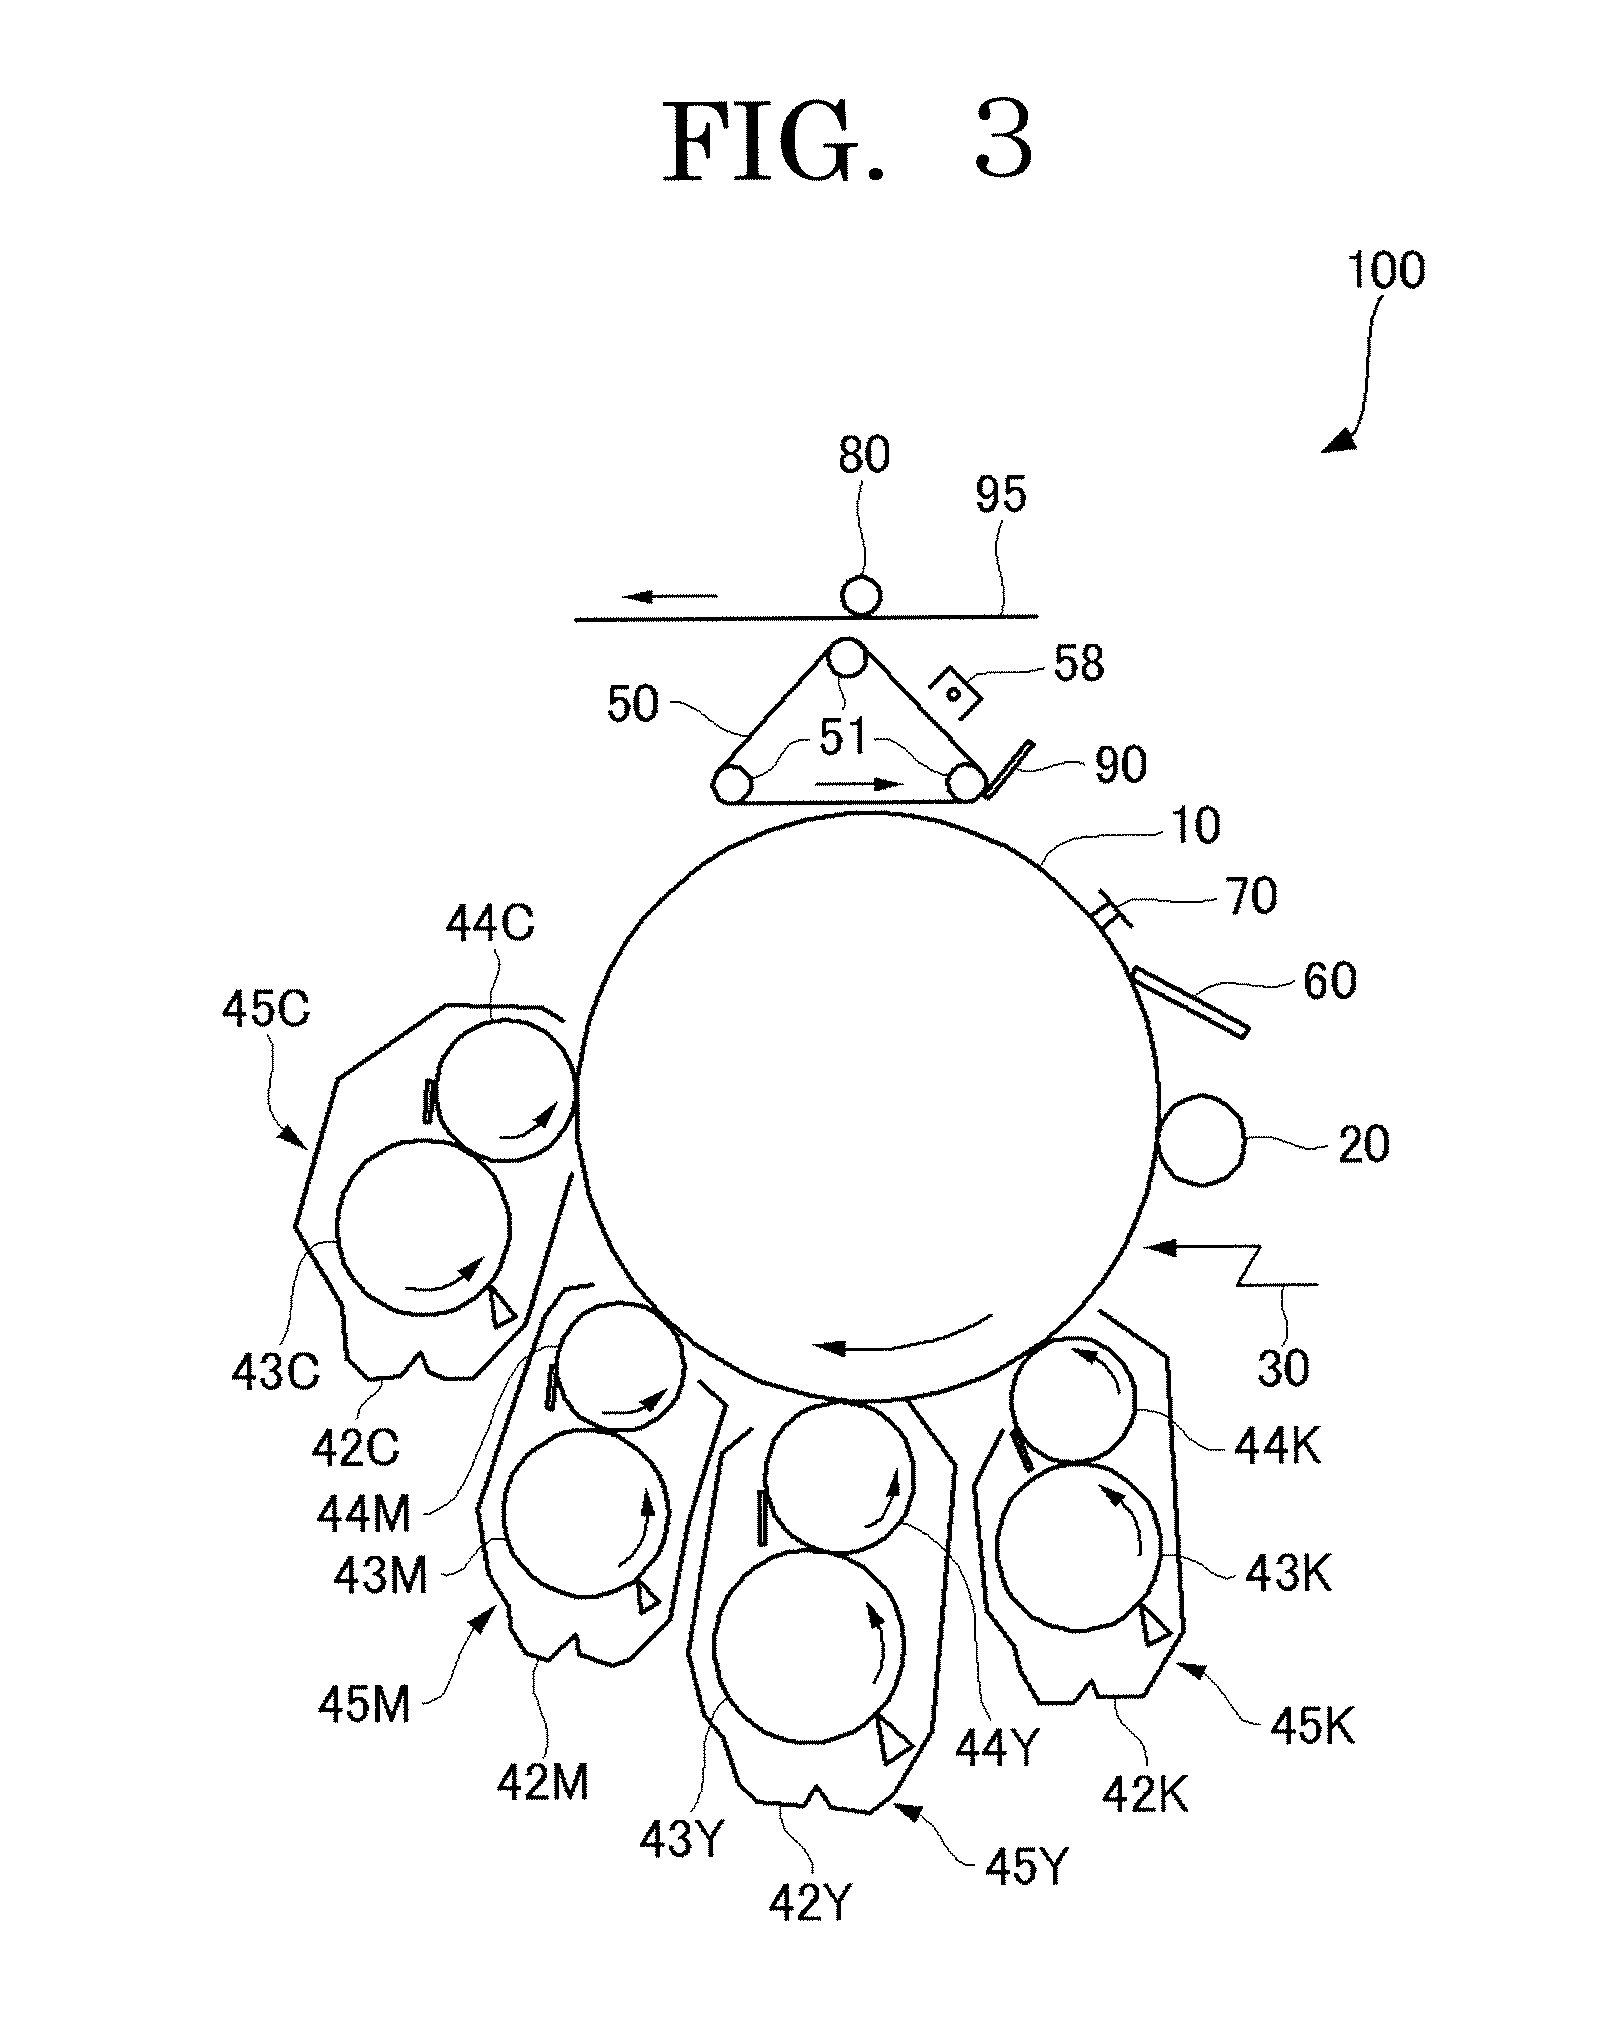 Toner as well as developer and image forming method using the same